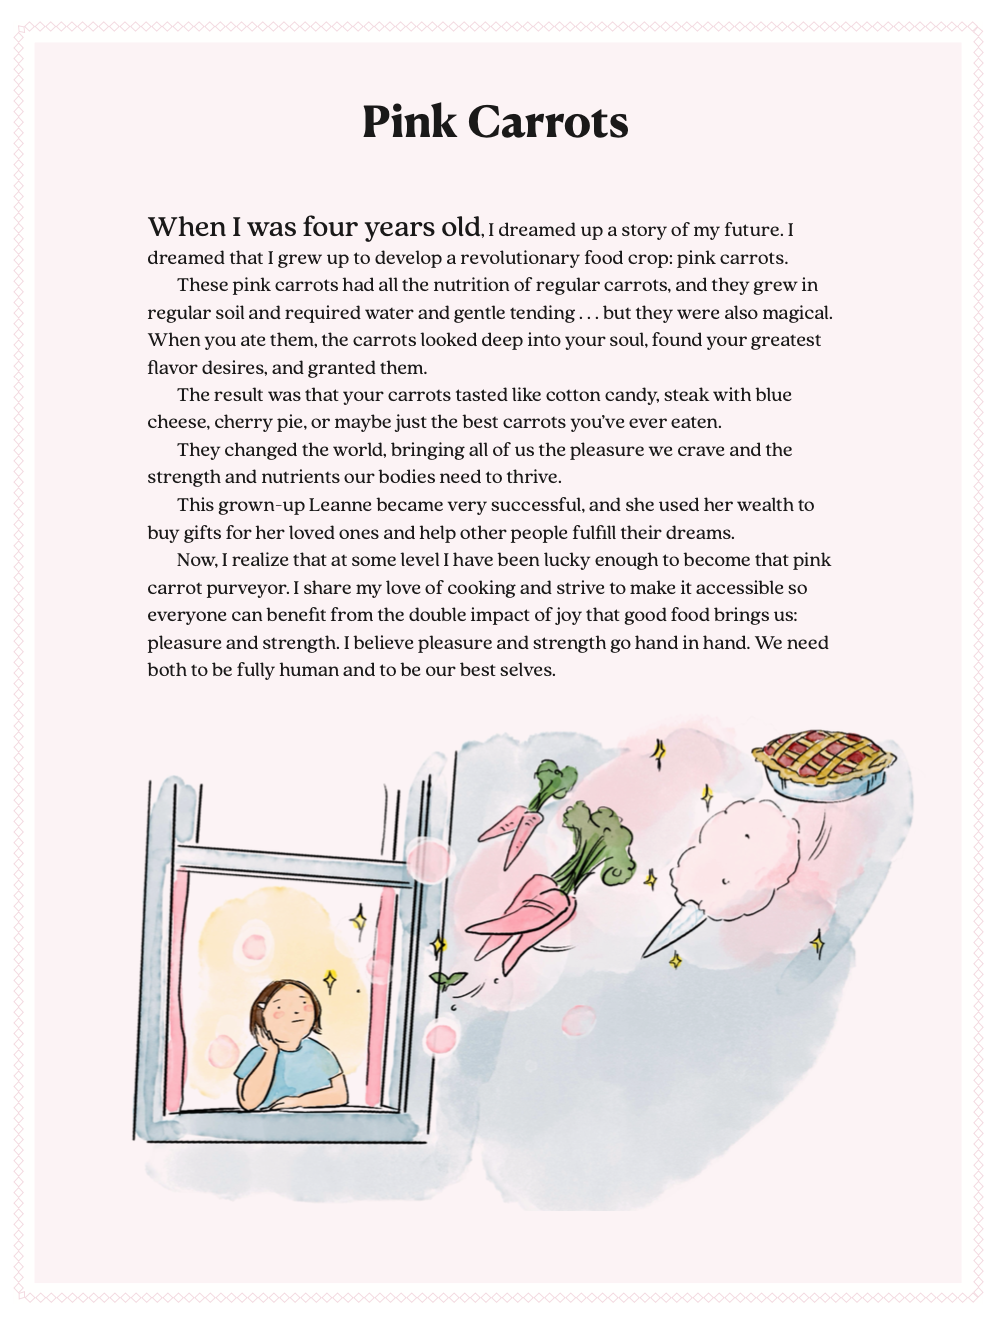 A page from Good Enough telling the story of Leanne's childhood dream to invent magical pink carrots.